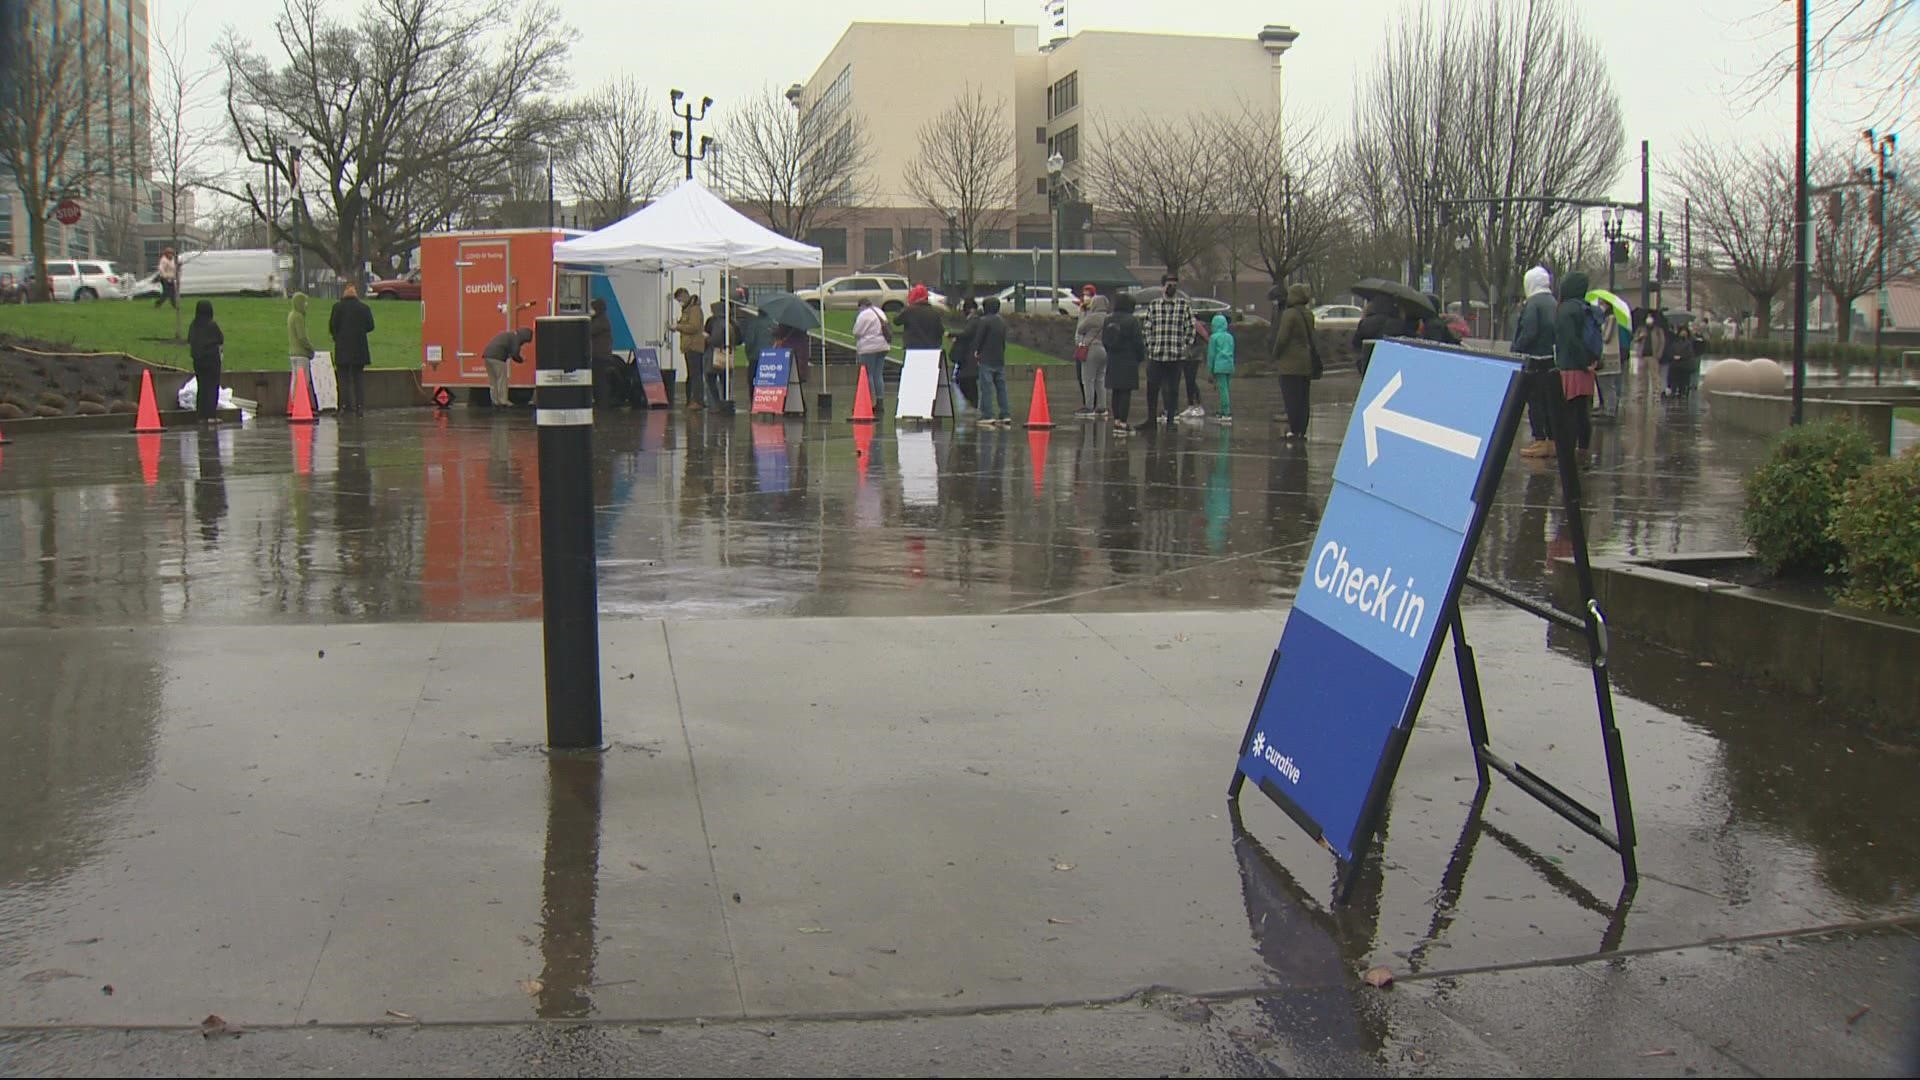 Many people are finding it difficult to get COVID tests though plans are underway to expand testing sites in Oregon. KGW's Katherine Cook reports.